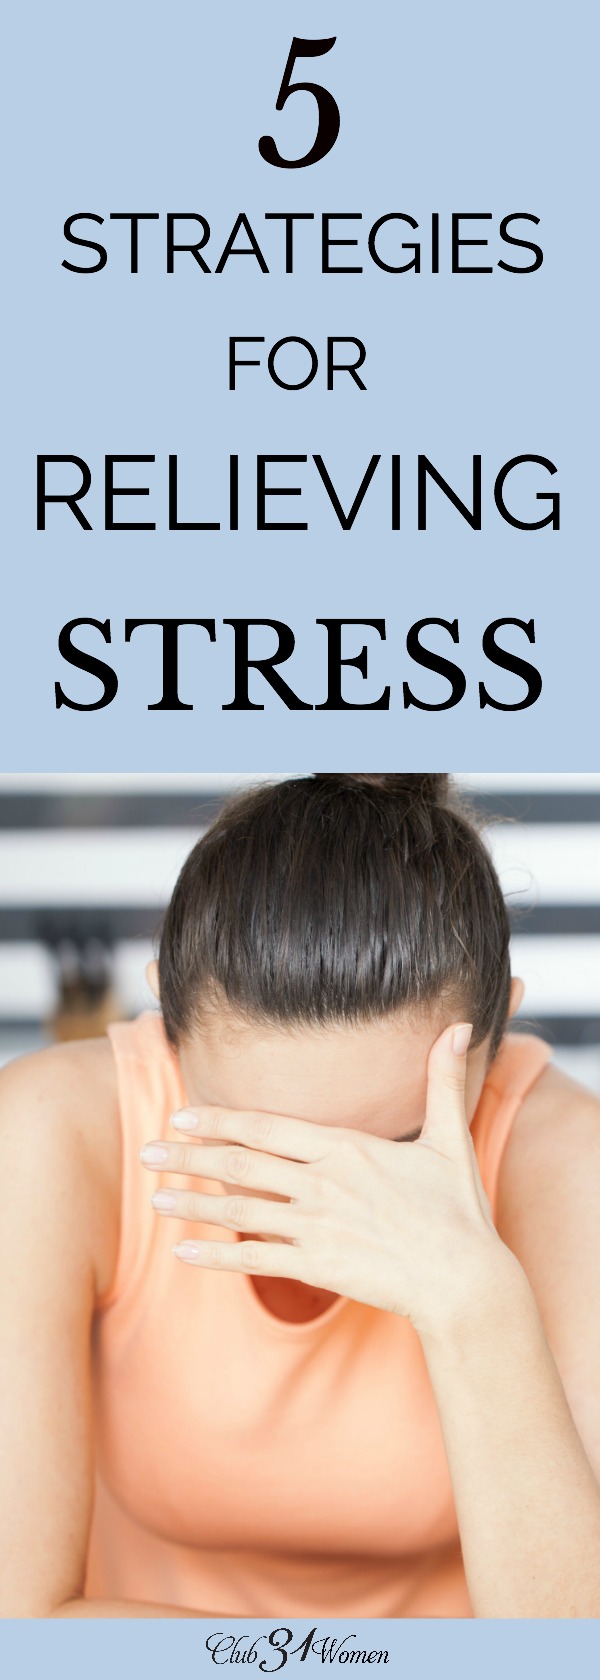 What can we do when stress threatens to take us over? How can we relieve some of that stress so we can care for ourselves and our family better? via @Club31Women